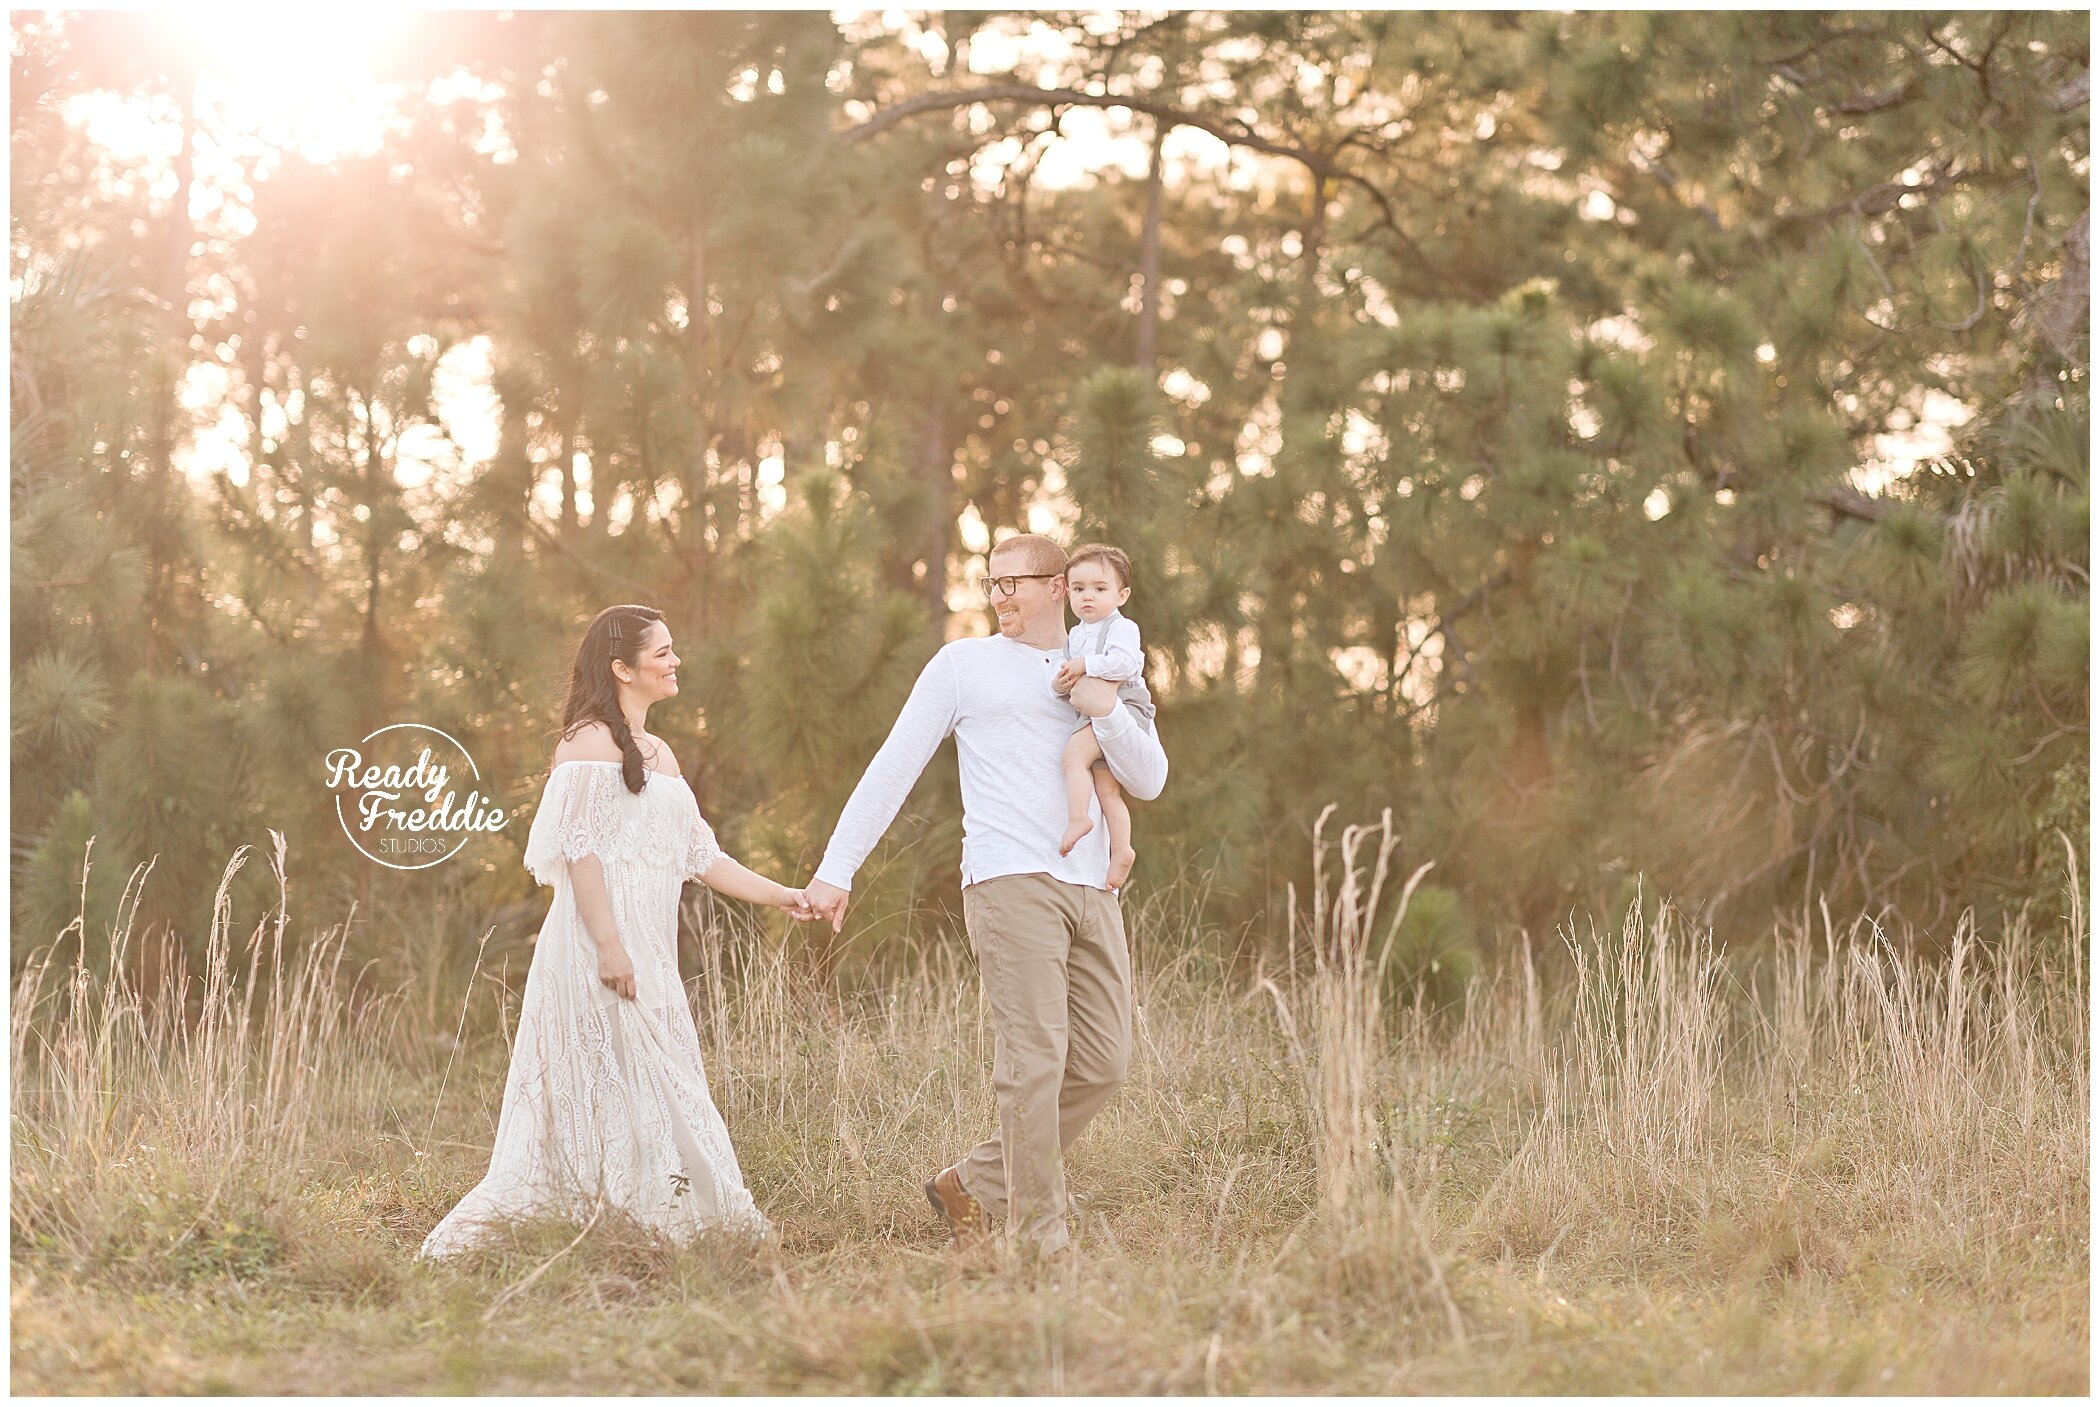 Ideas for poses family photography session during sunset with Ivanna Vidal Photography